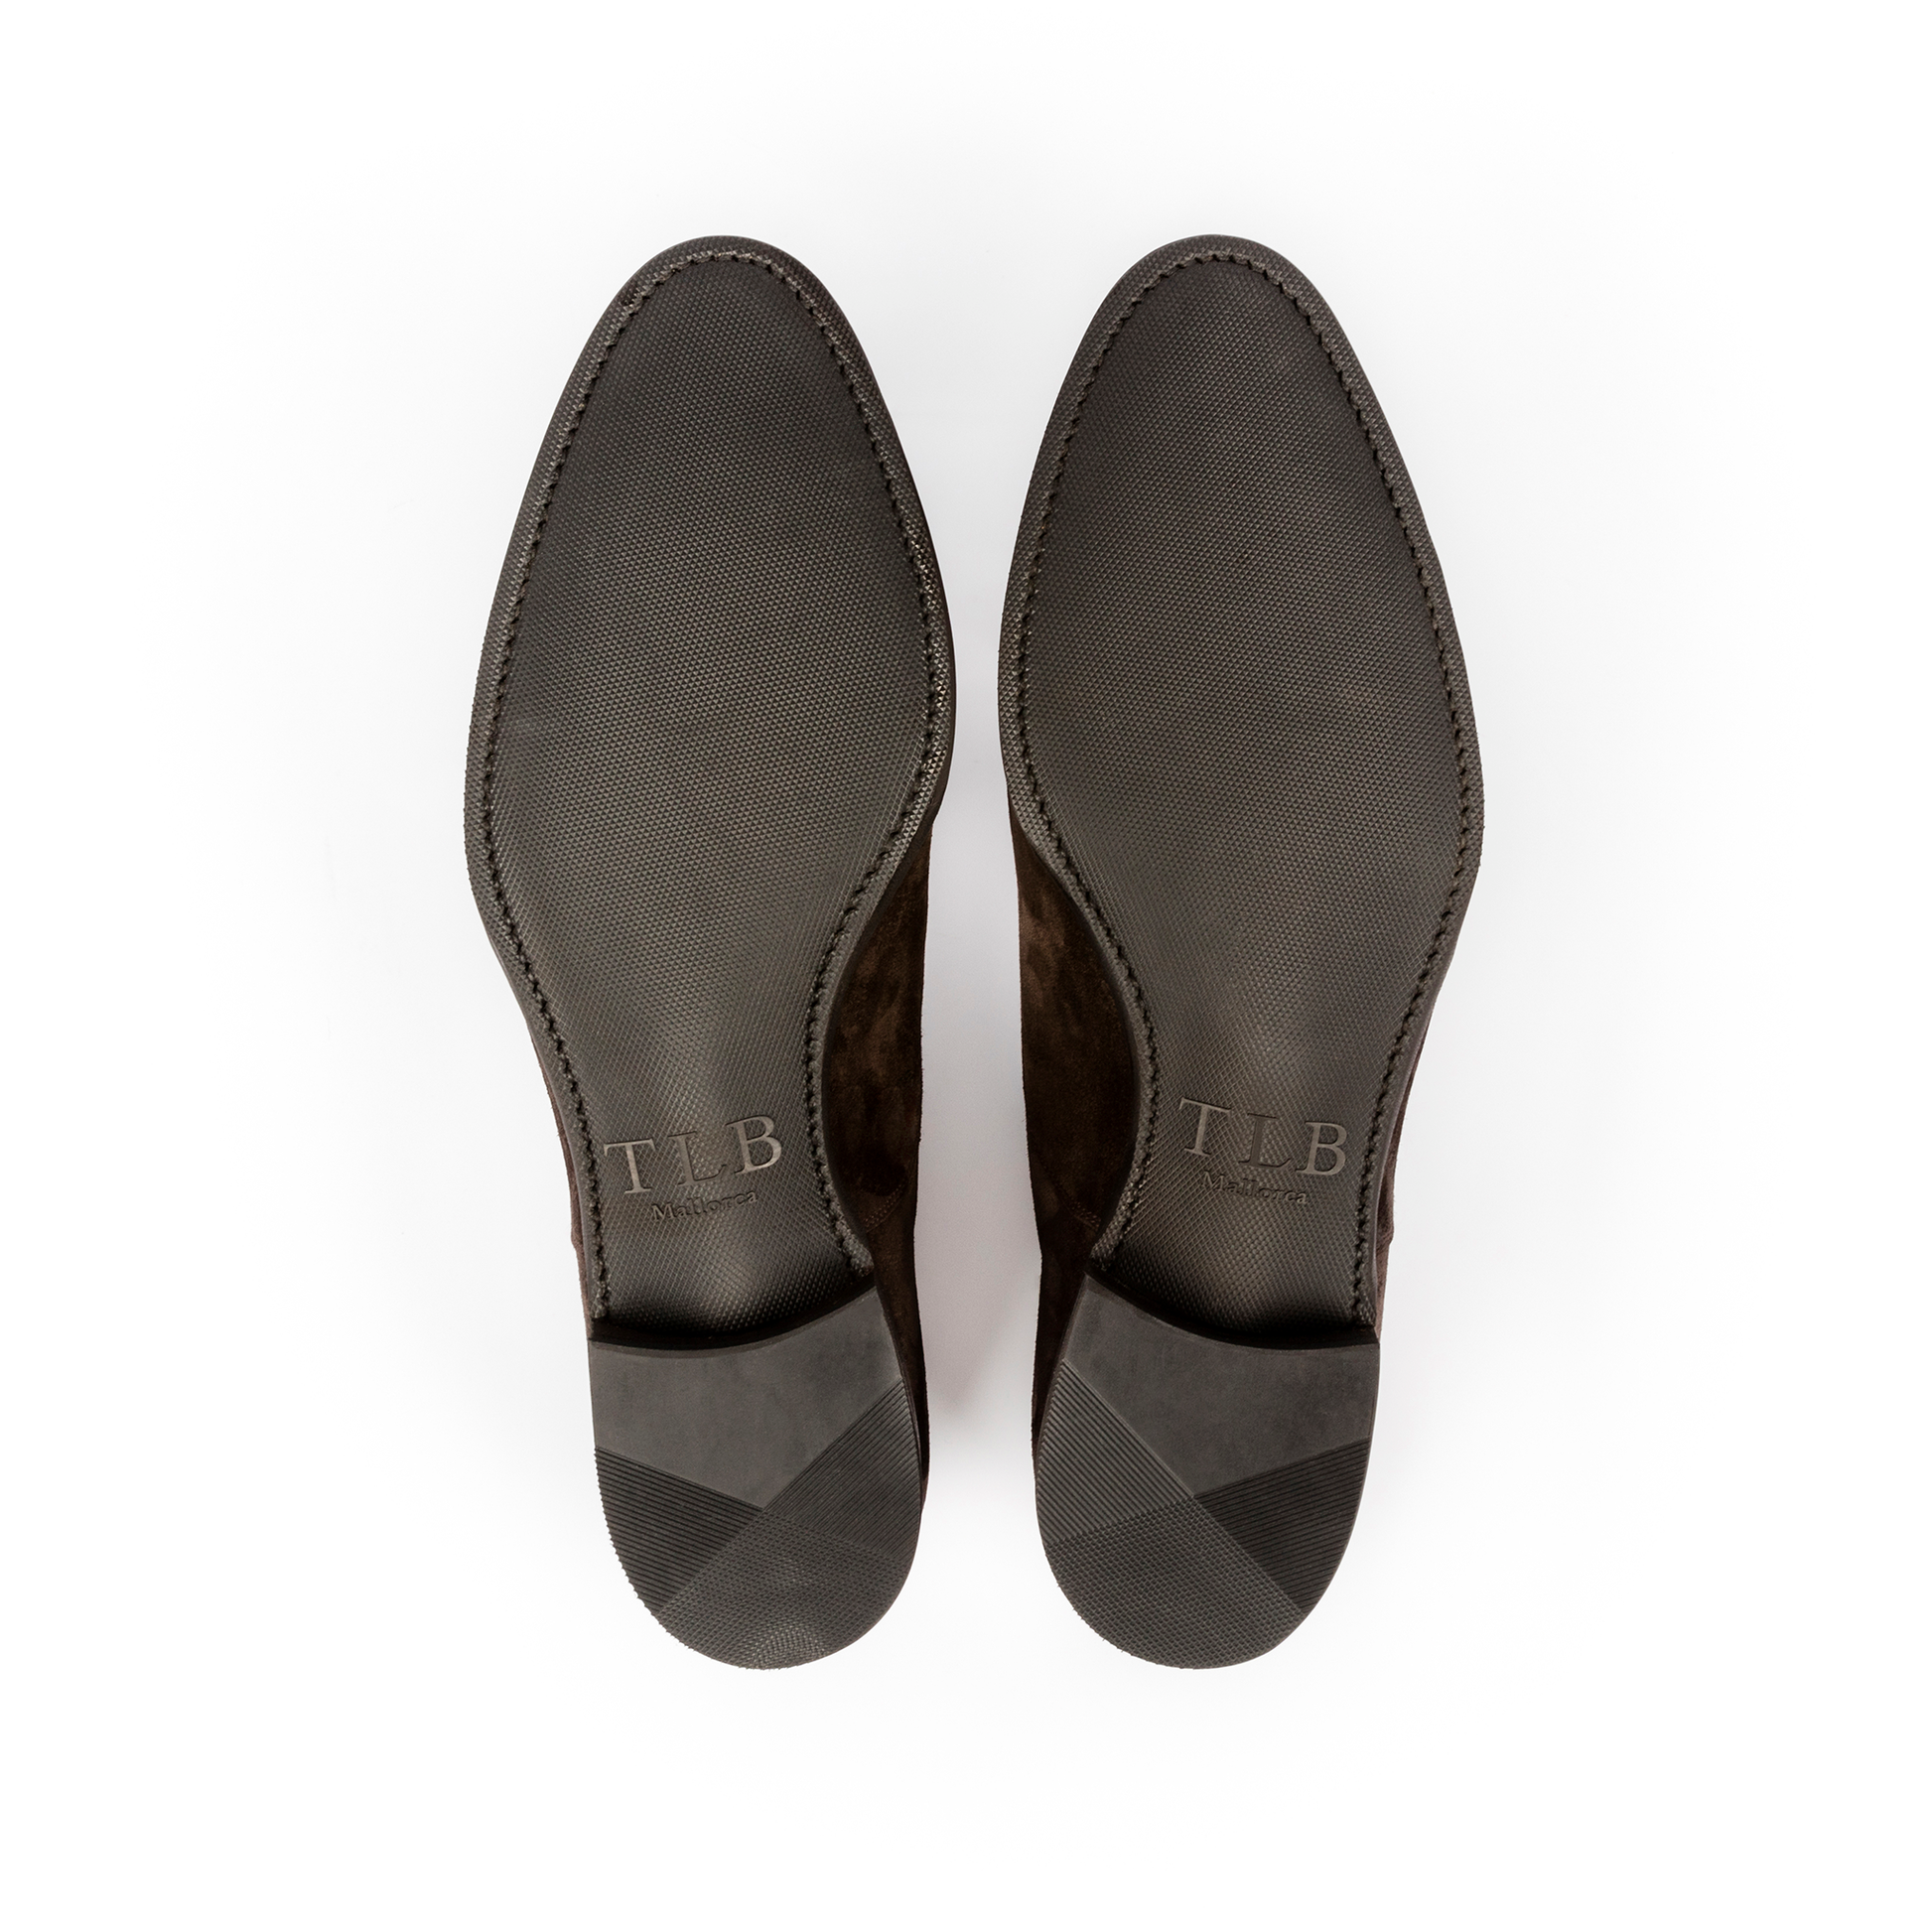 TLB Mallorca leather shoes 238 / GOYA / SUEDE BROWN